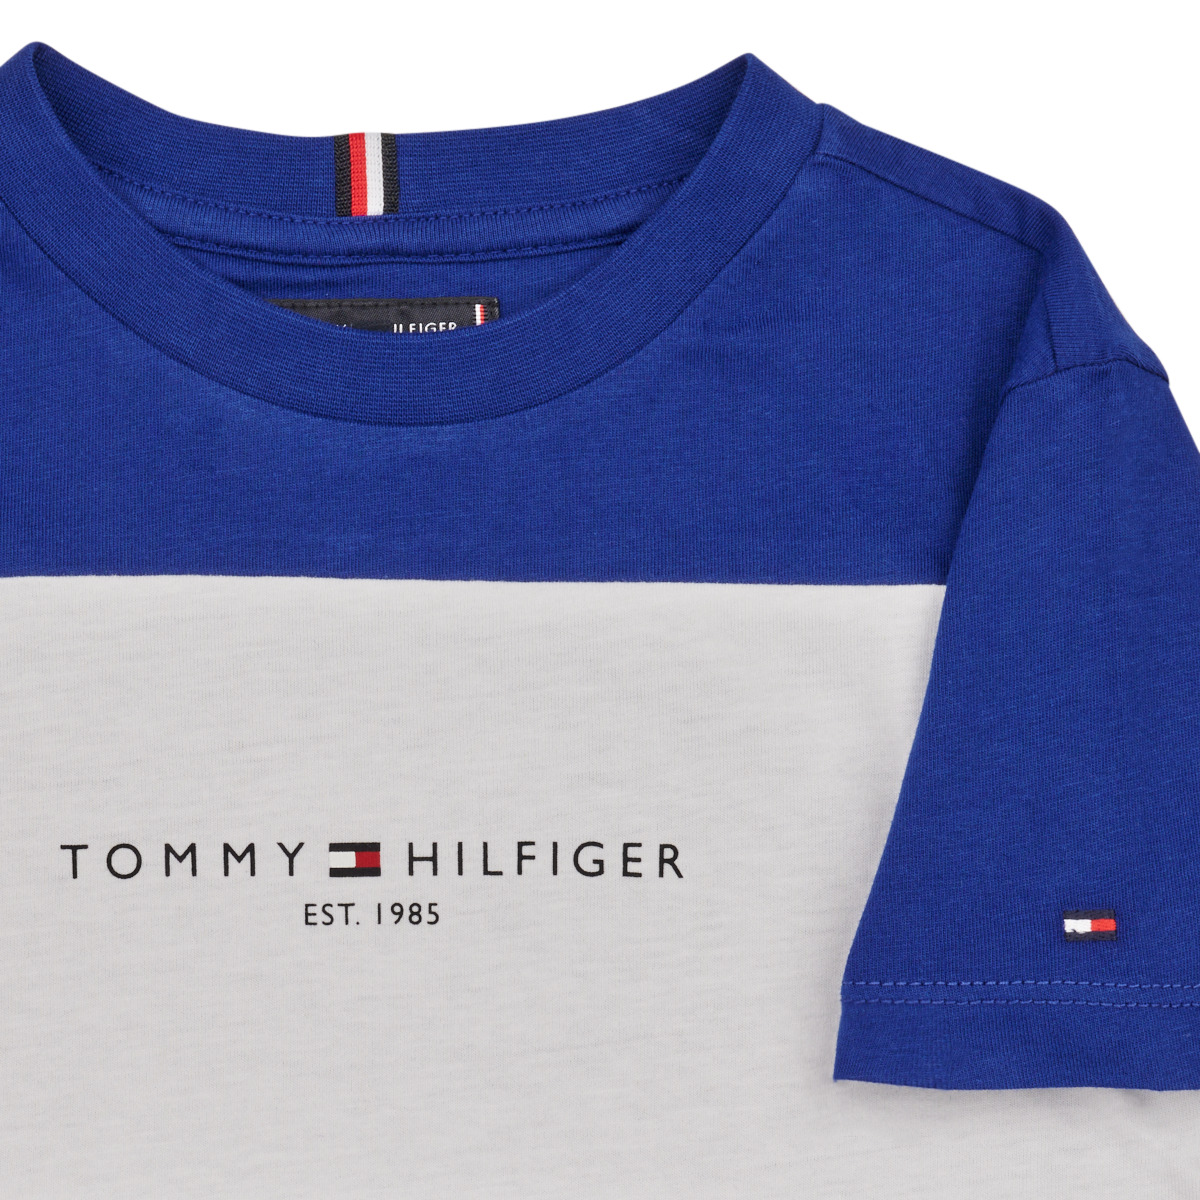 Tommy Hilfiger Marine ESSENTIAL COLORBLOCK TEE S/S dZYUPPKY